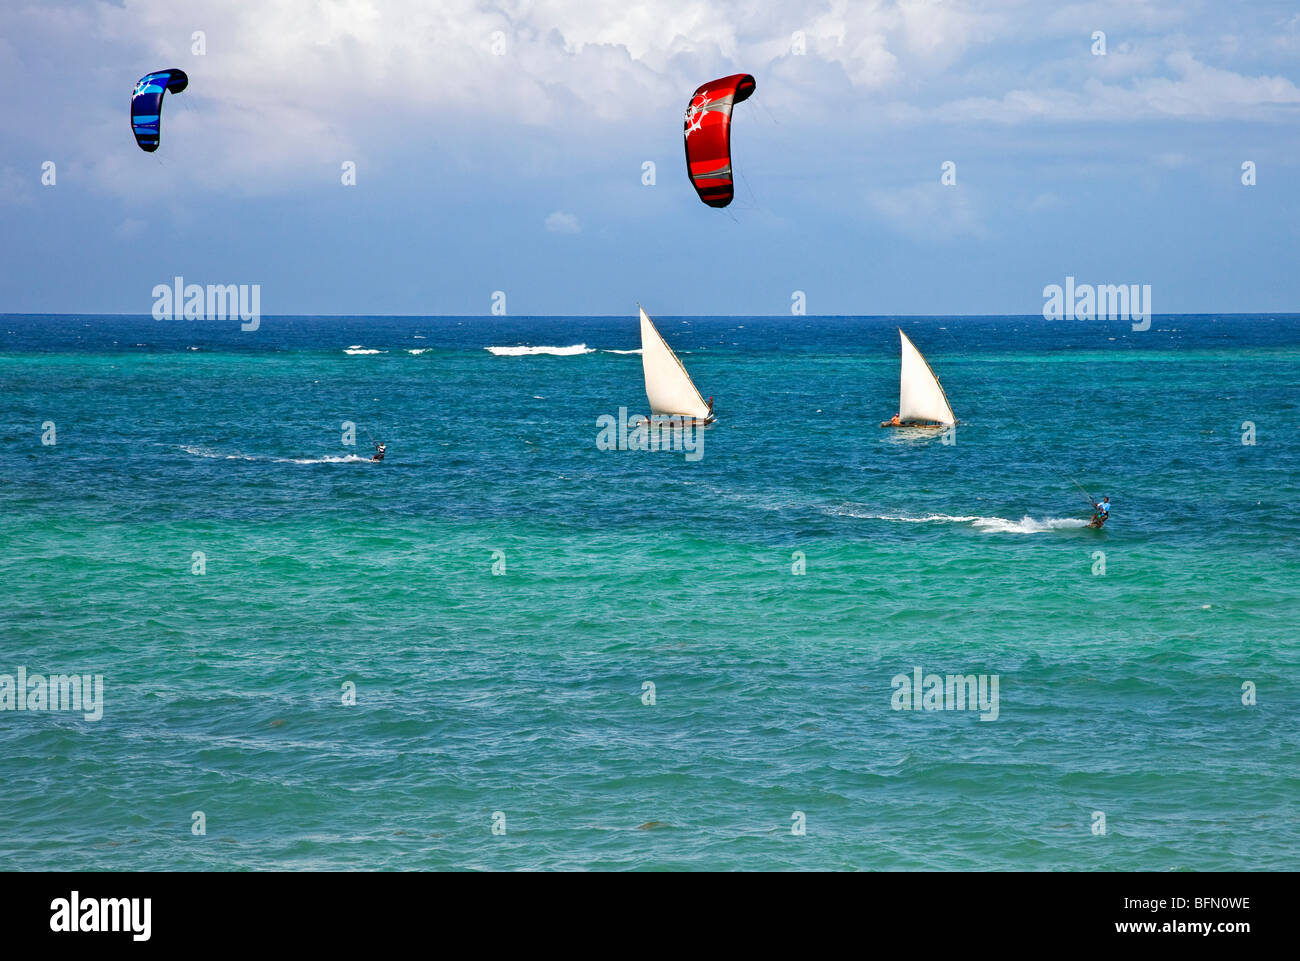 Kenya, Mombasa. Two kite surfers speed away from outrigger canoes sailing in the clear waters of Diani Beach. Stock Photo